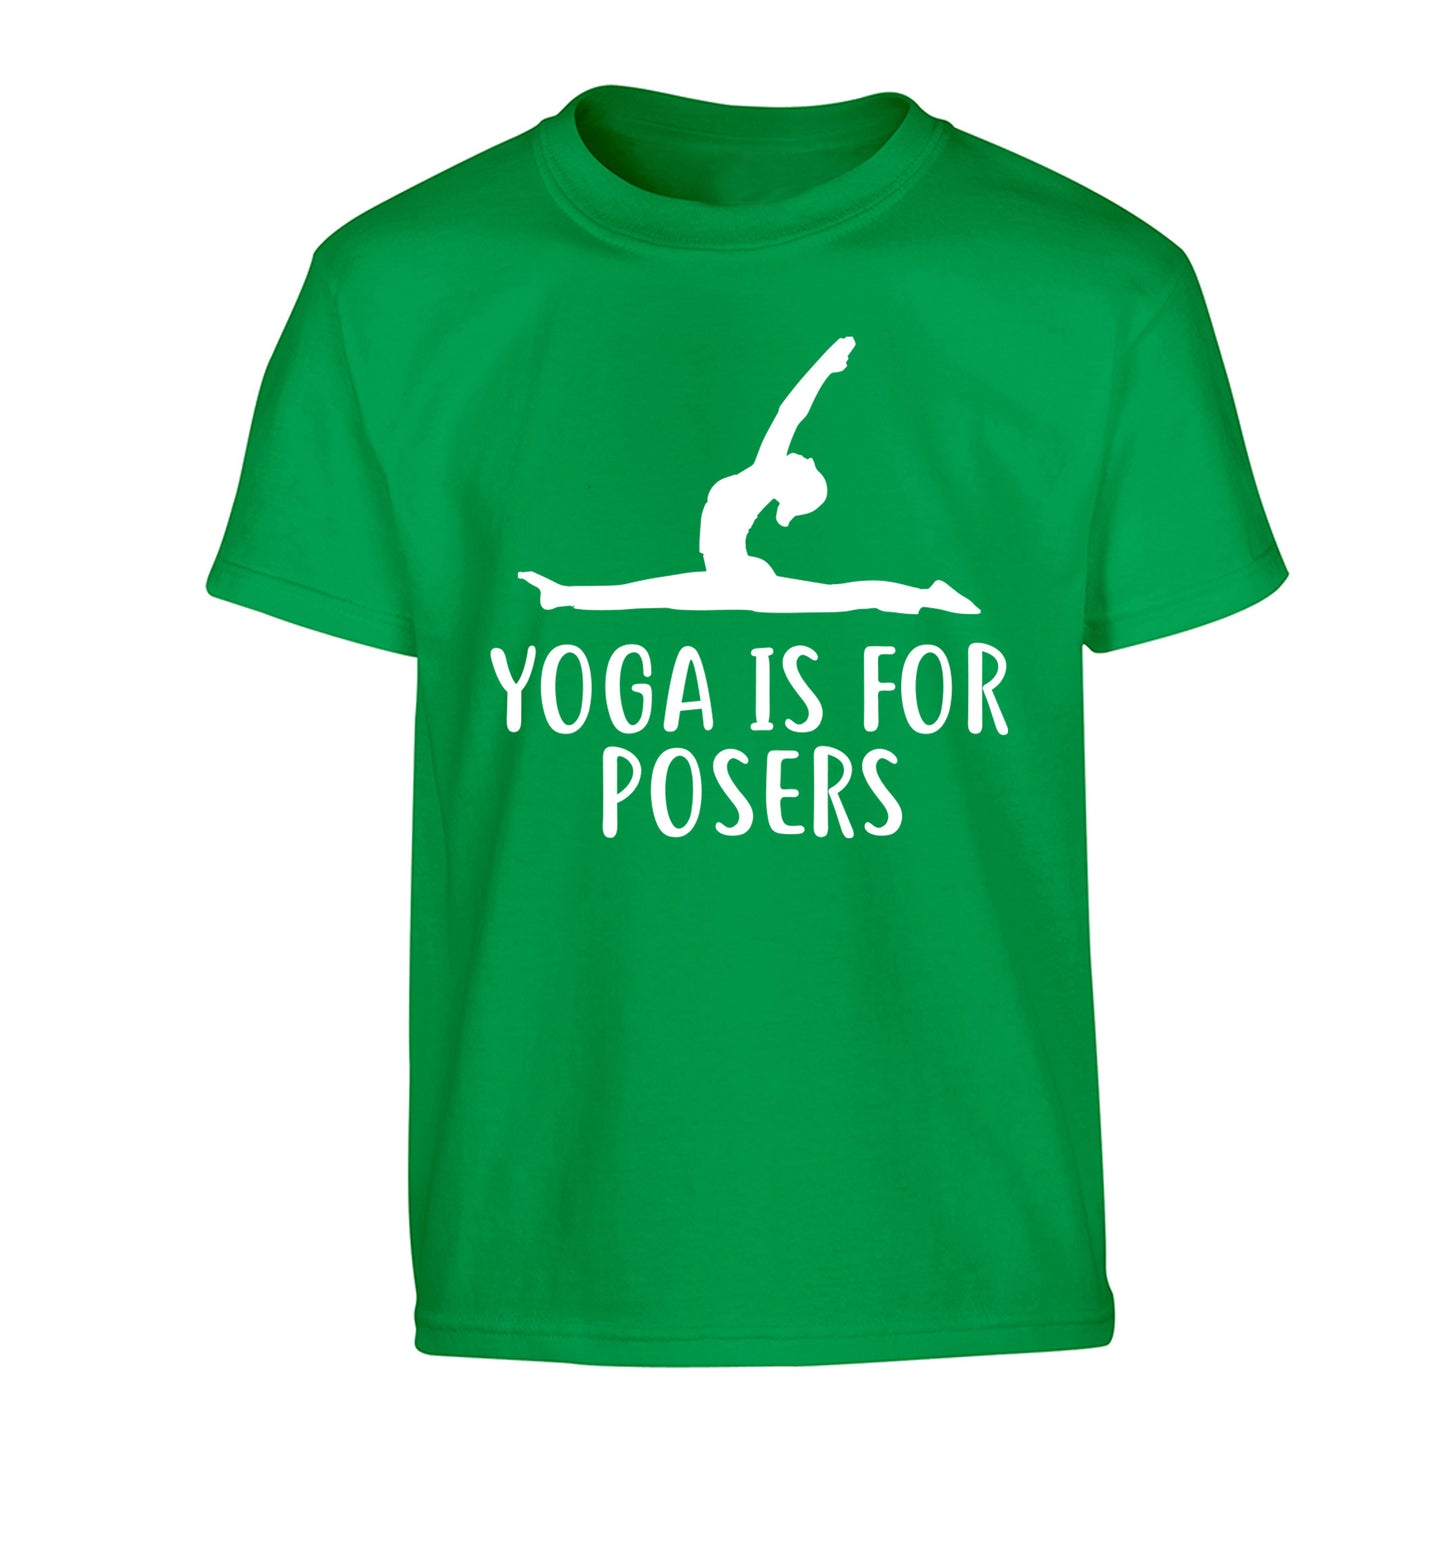 Yoga is for posers Children's green Tshirt 12-13 Years